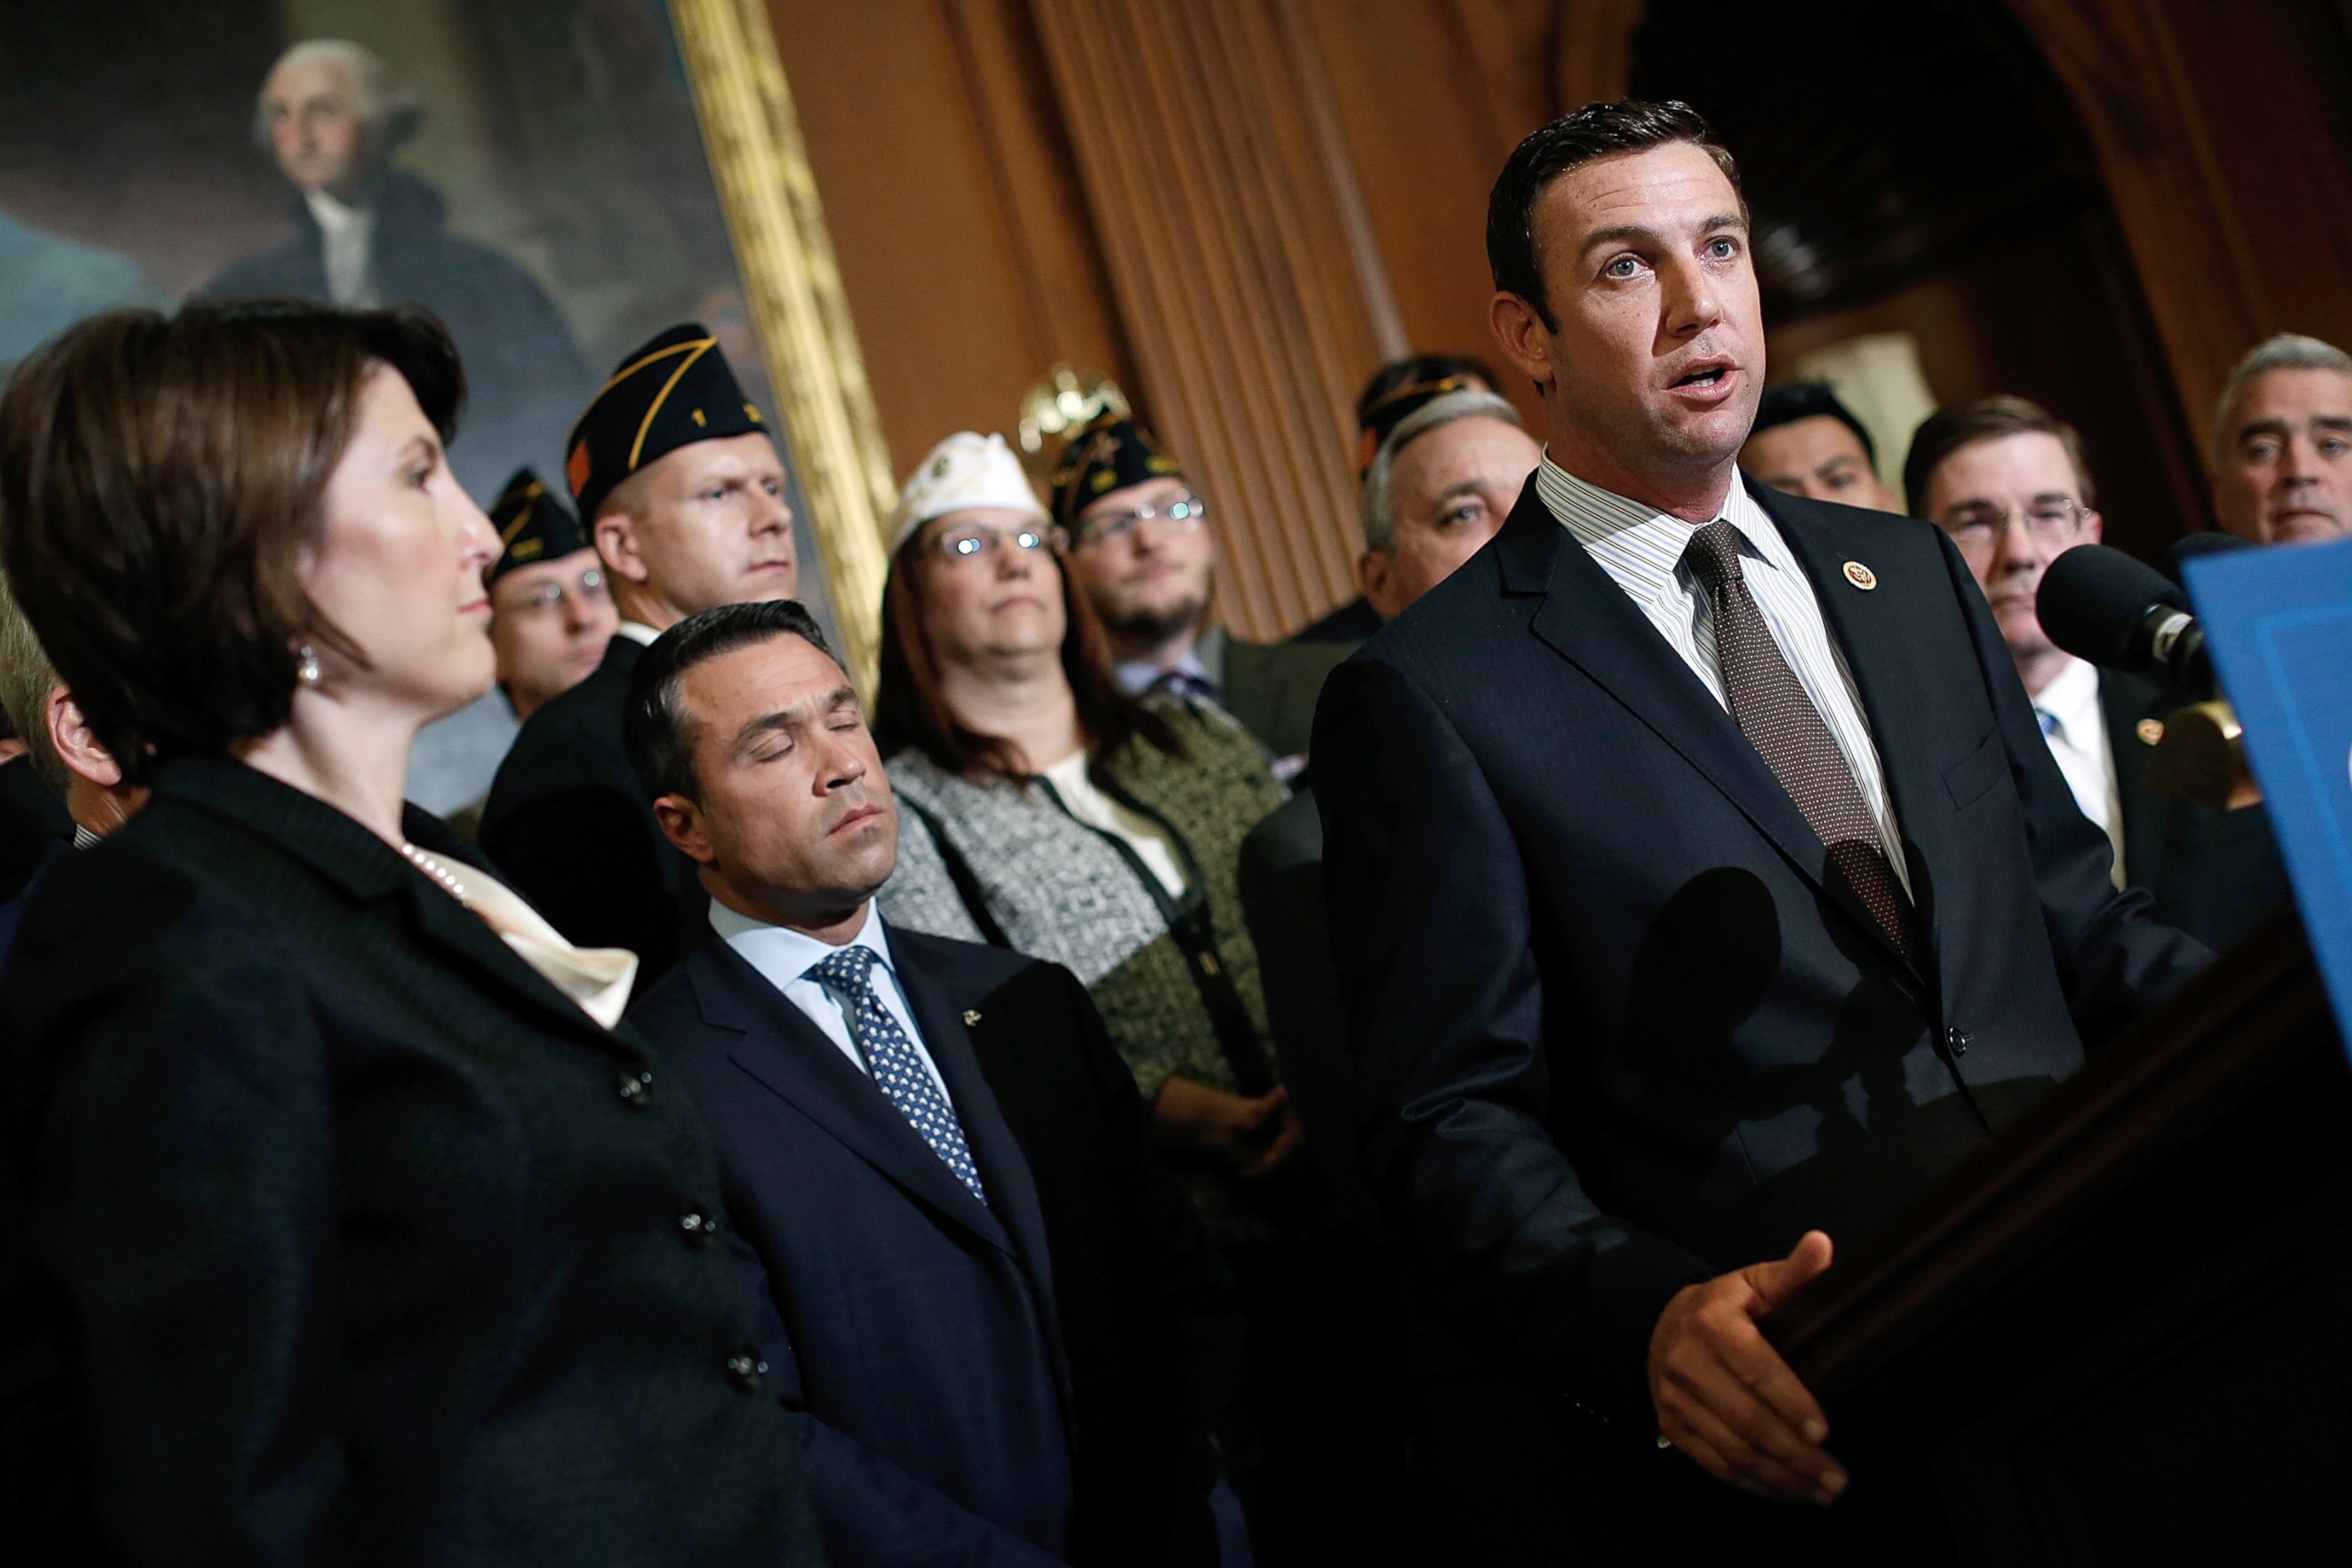 PHOTO: Rep. Duncan Hunter (R-Calif.) speaks during a news conference held by House Republicans on "Protecting America's Veterans" at the U.S. Capitol, May 29, 2014, in Washington.